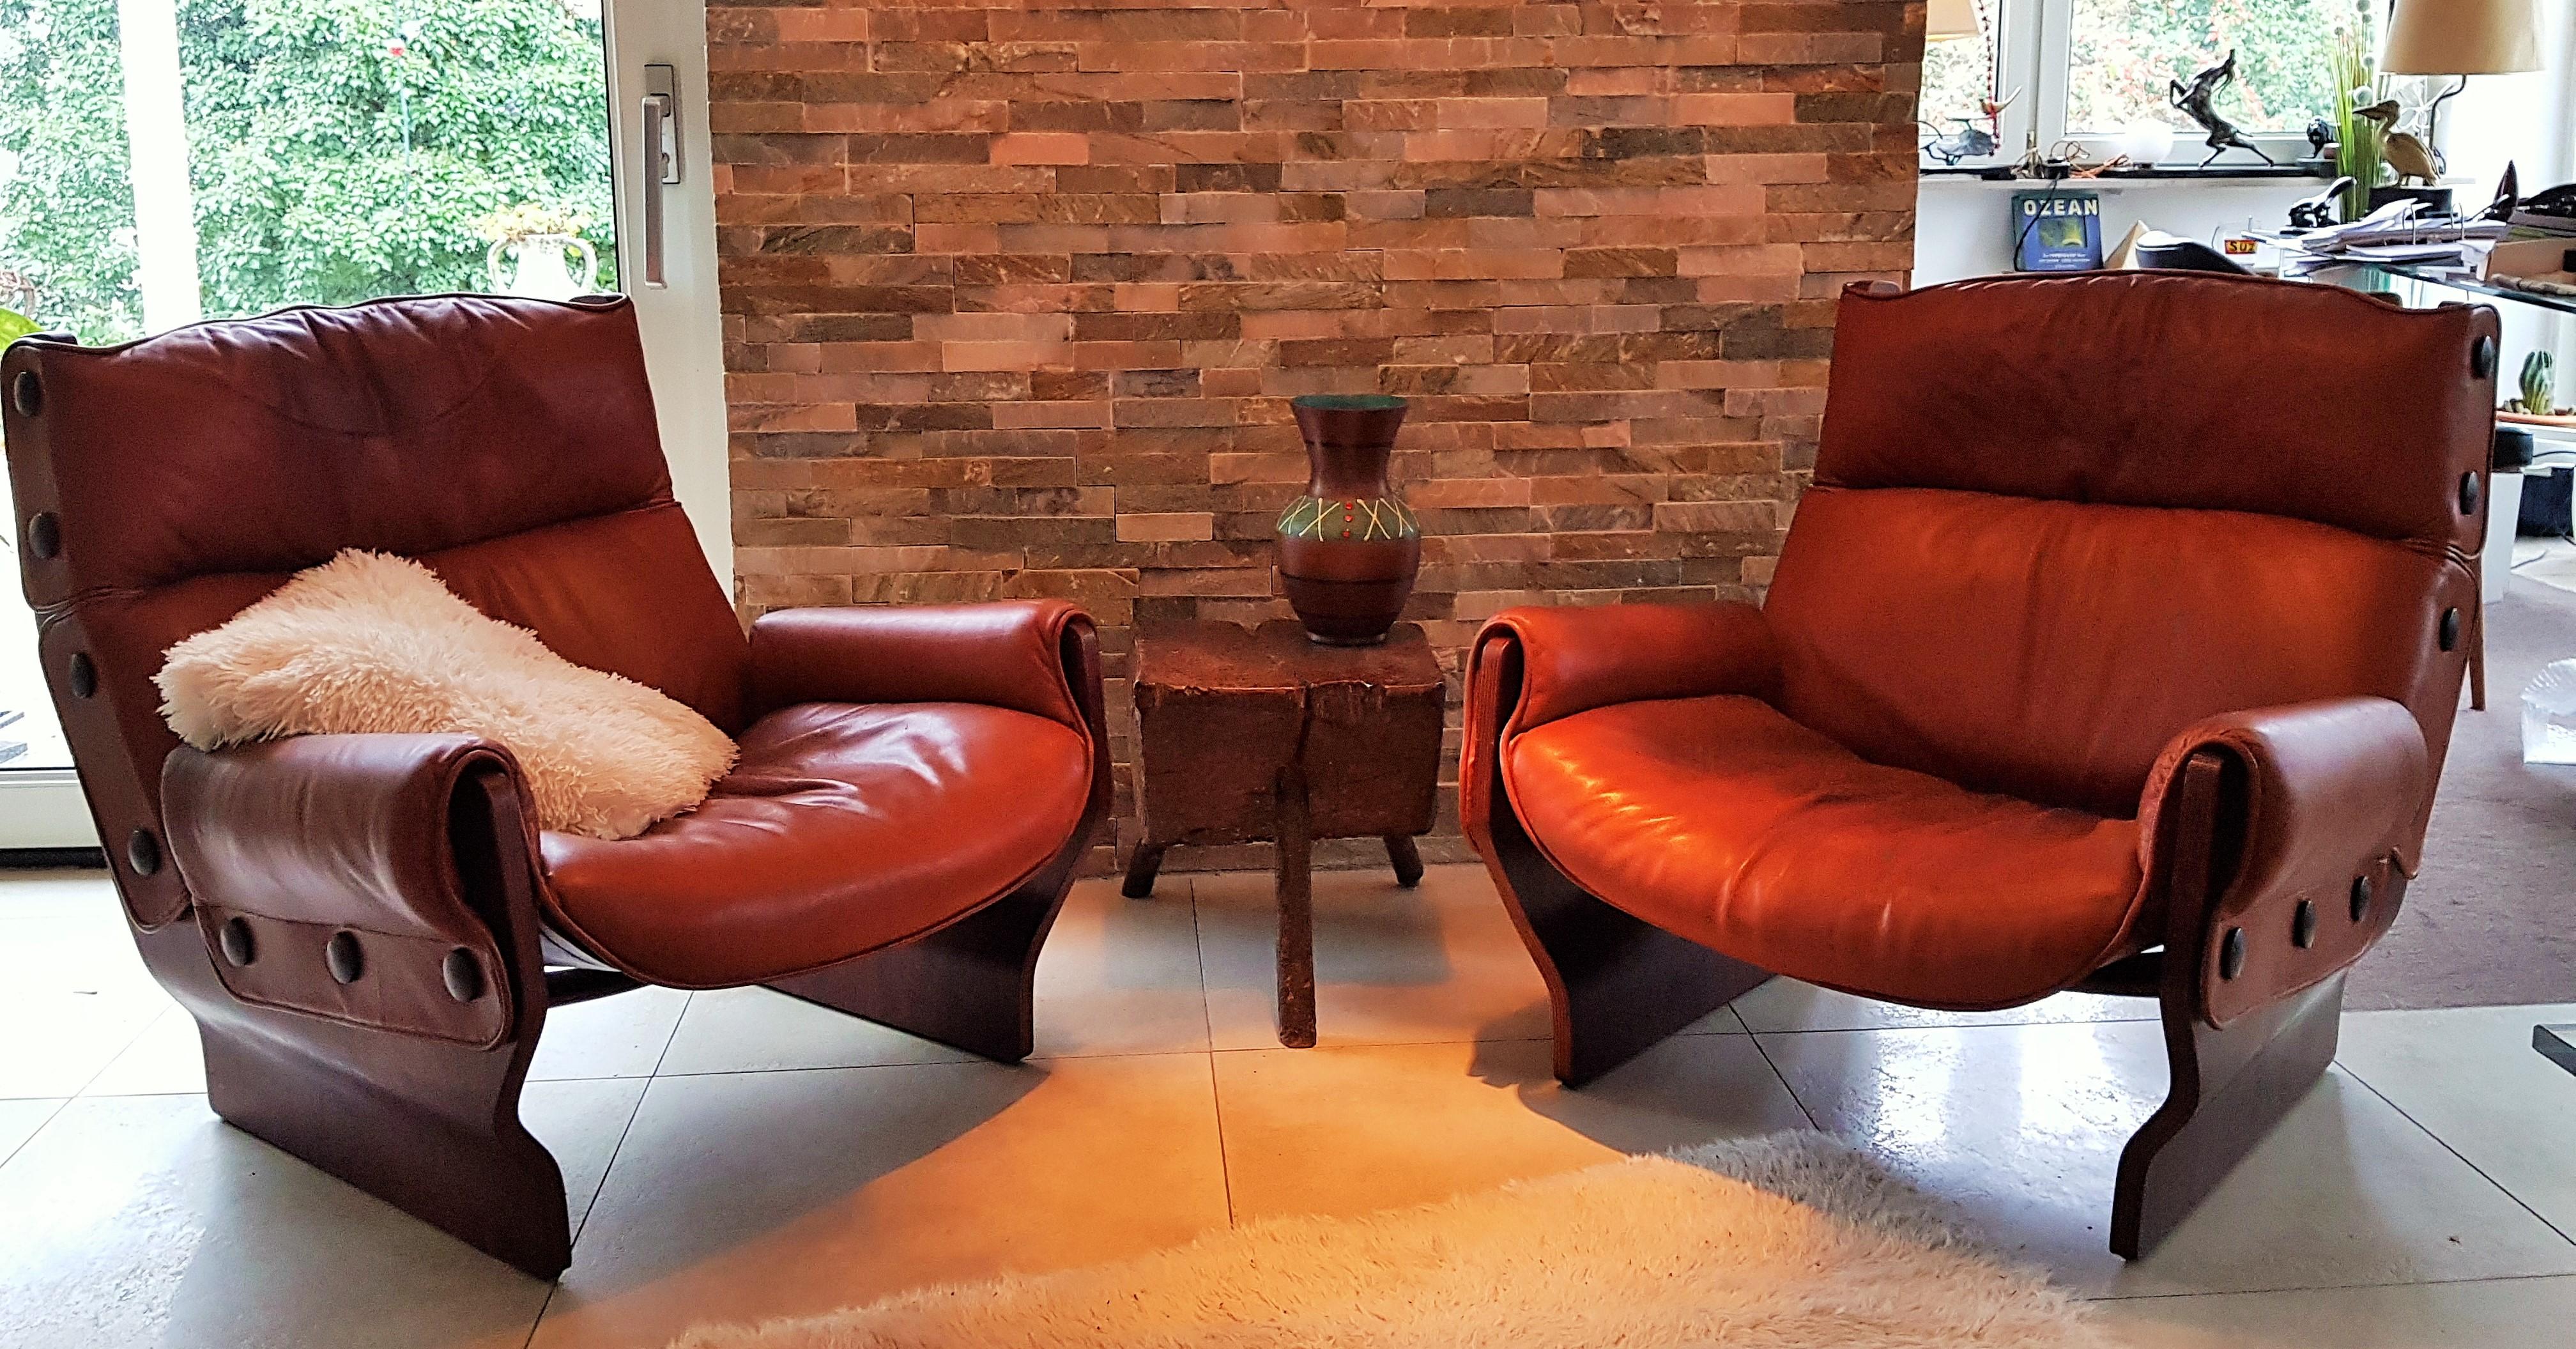 Pair of first series Leather 'Canada' chairs by Osvaldo Borsani for Tecno (see label). Frame stable in perfect condition. Leather with signs of wear. Upholstery in good condition.

Designed in 1965, Model P110. Italy

Teak wood veneered plywood,